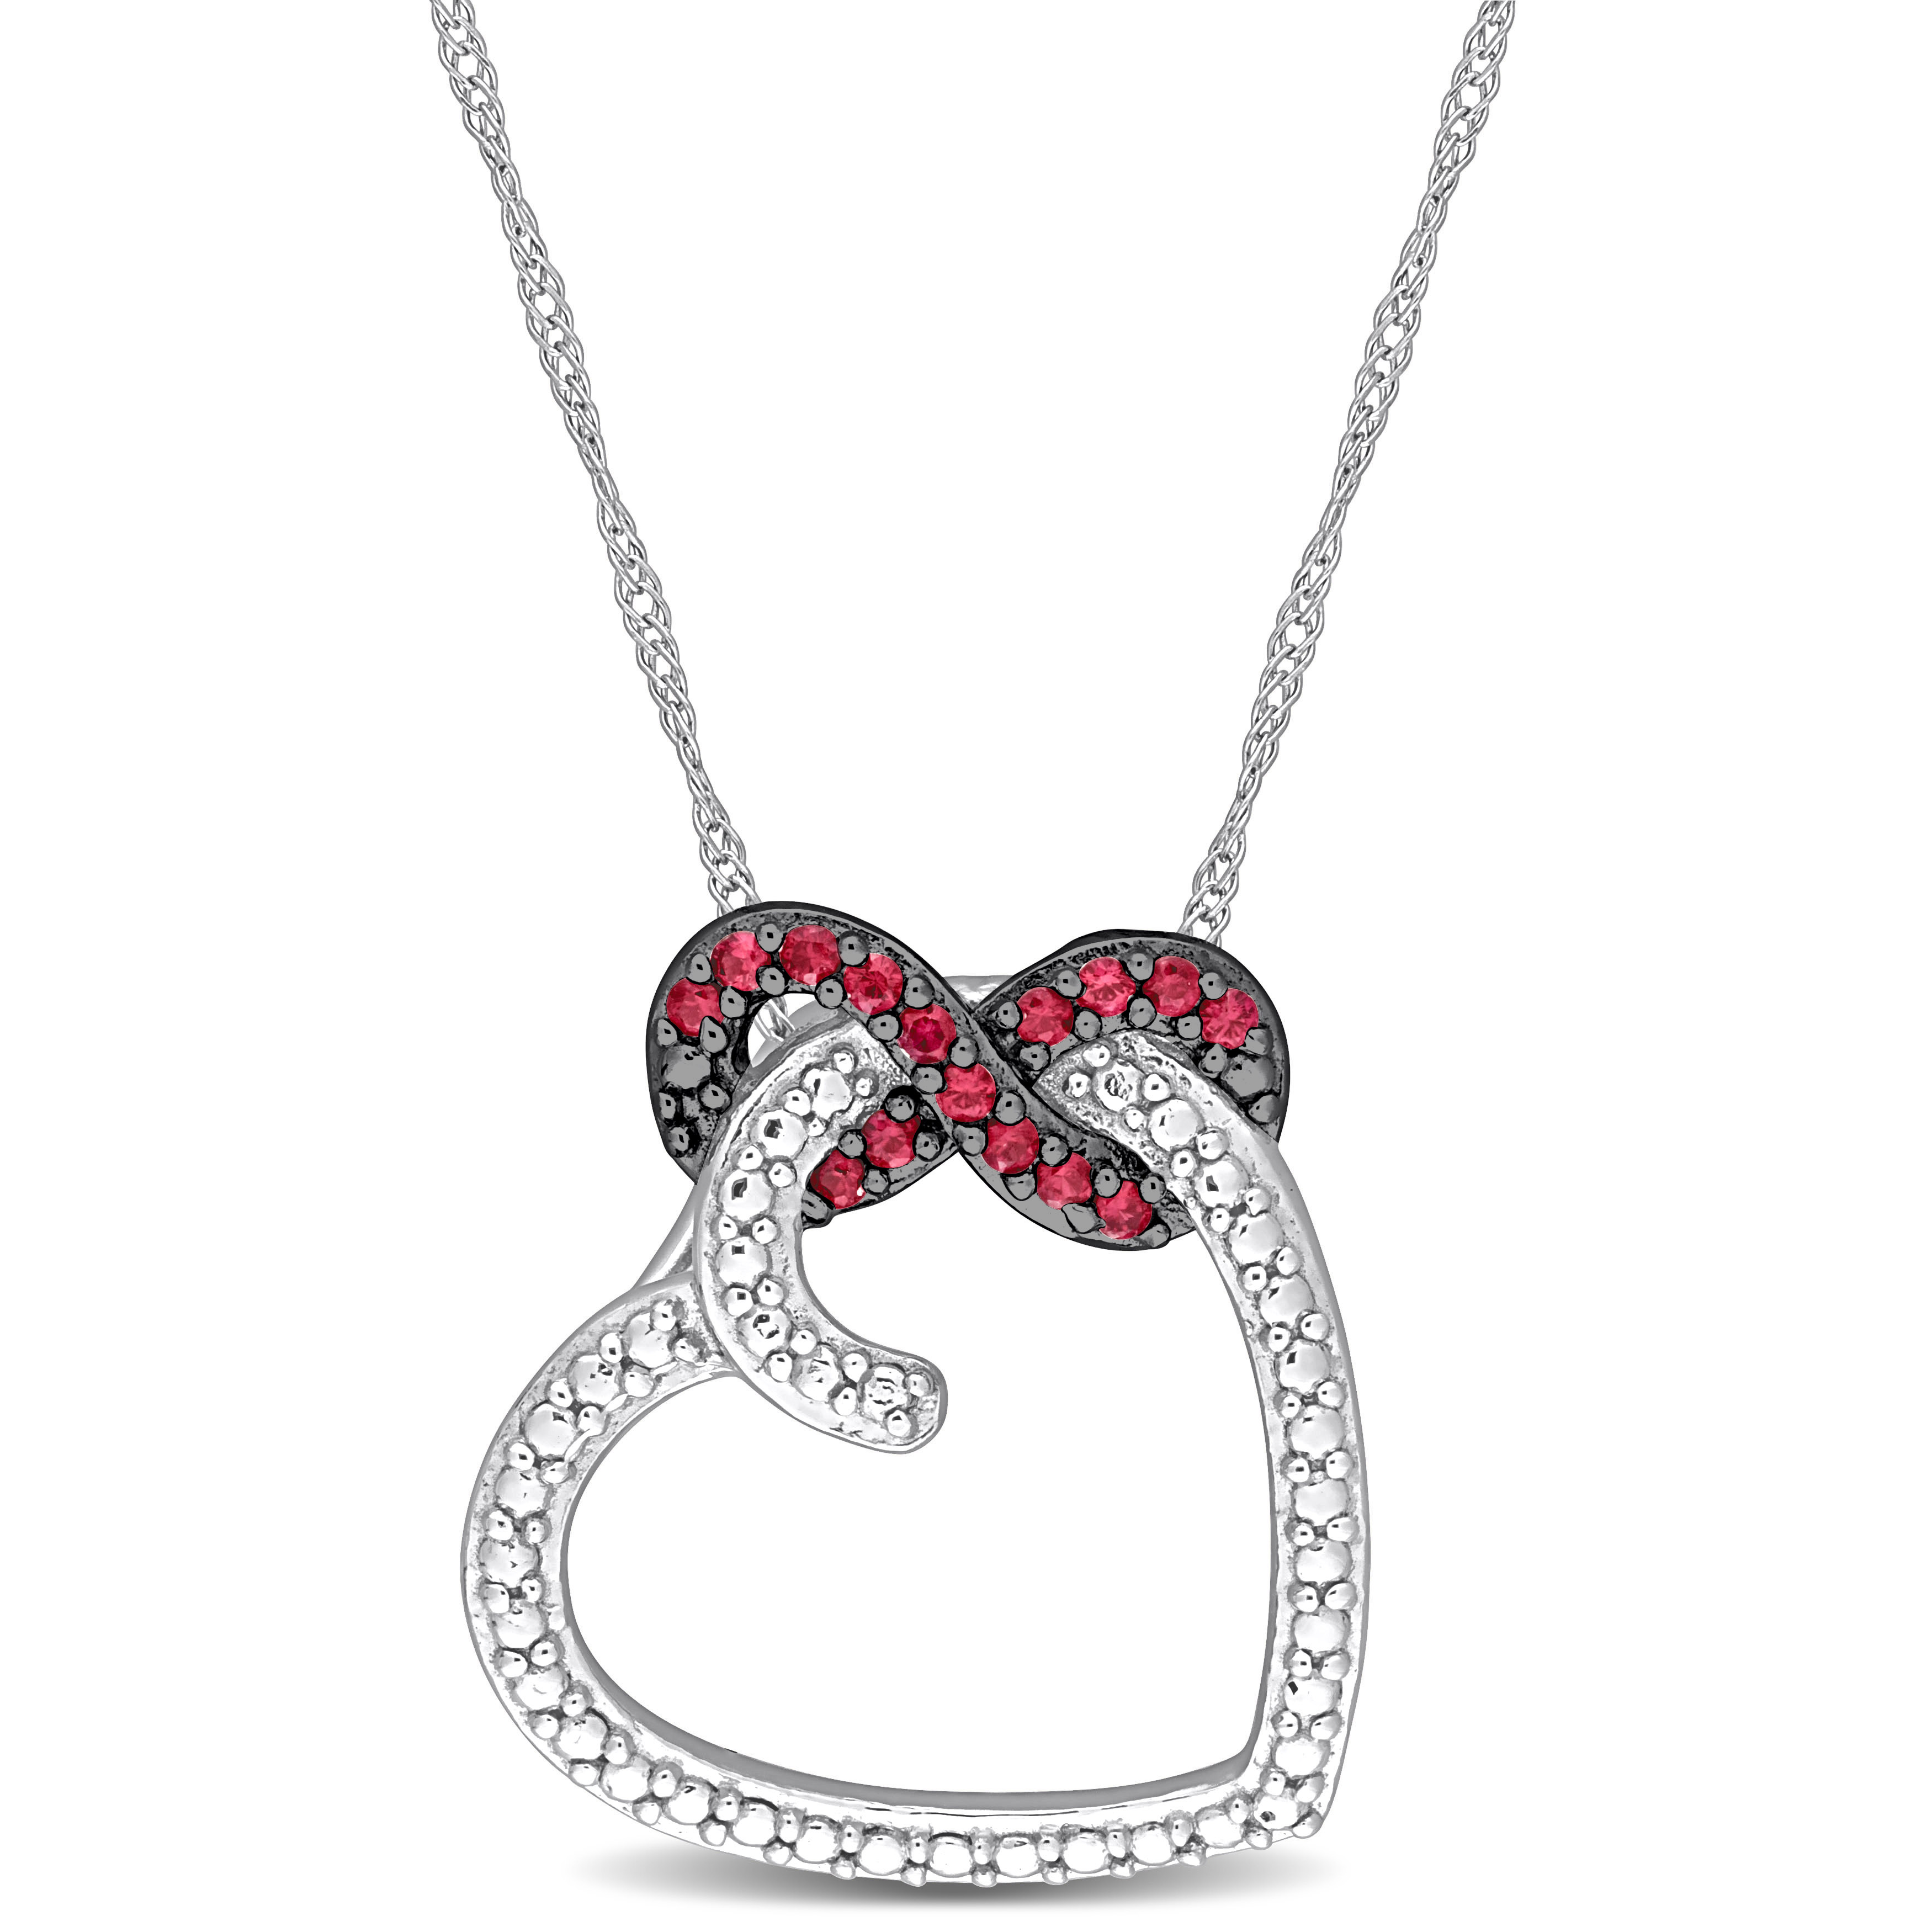 1/6 CT TGW Ruby Infinity Heart Pendant with Chain in 10k White Gold - 17 in.